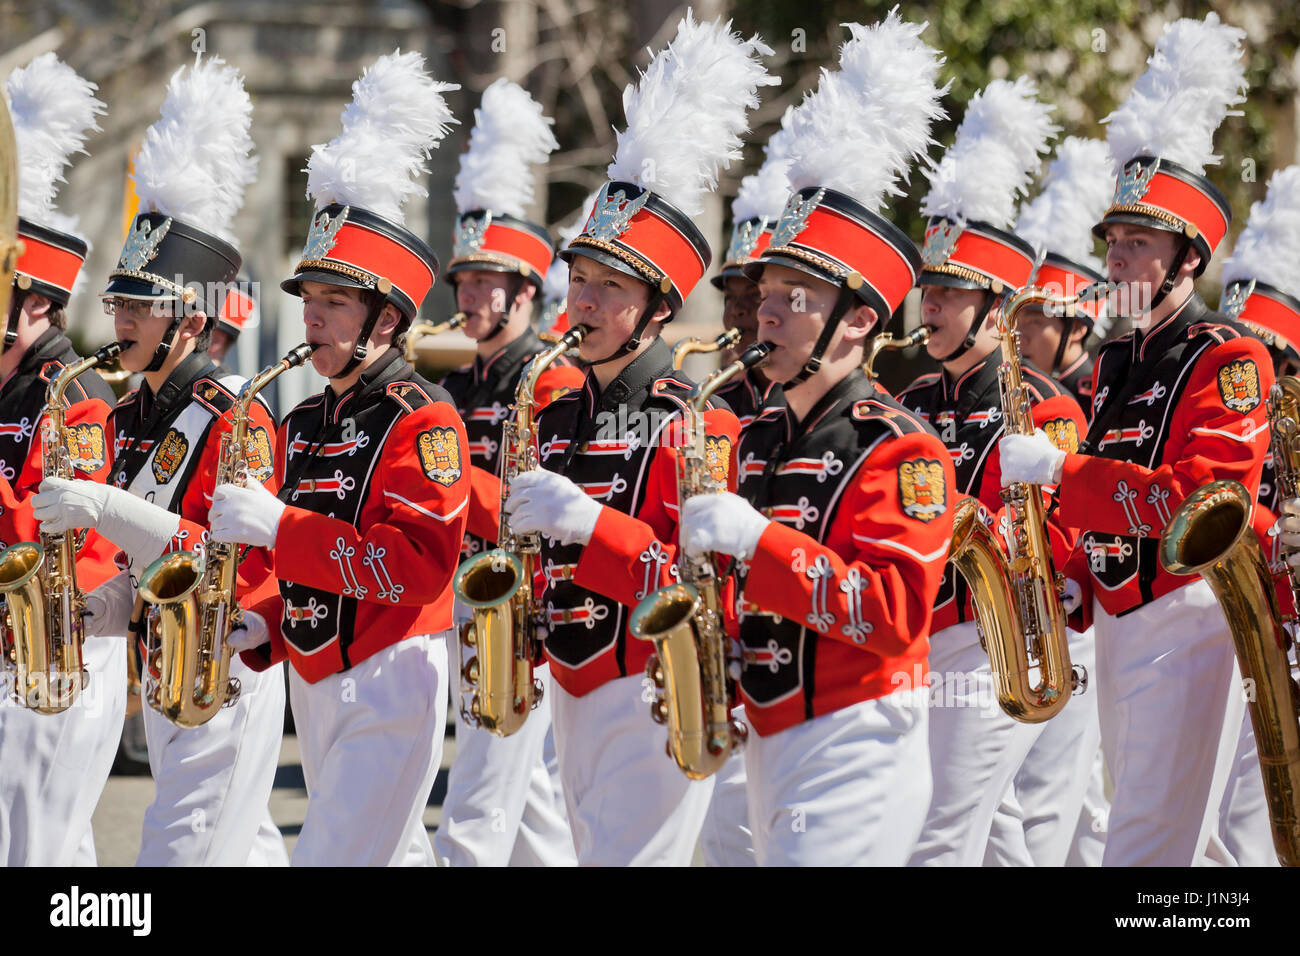 High school marching band saxophone section (sax players) - USA Stock Photo